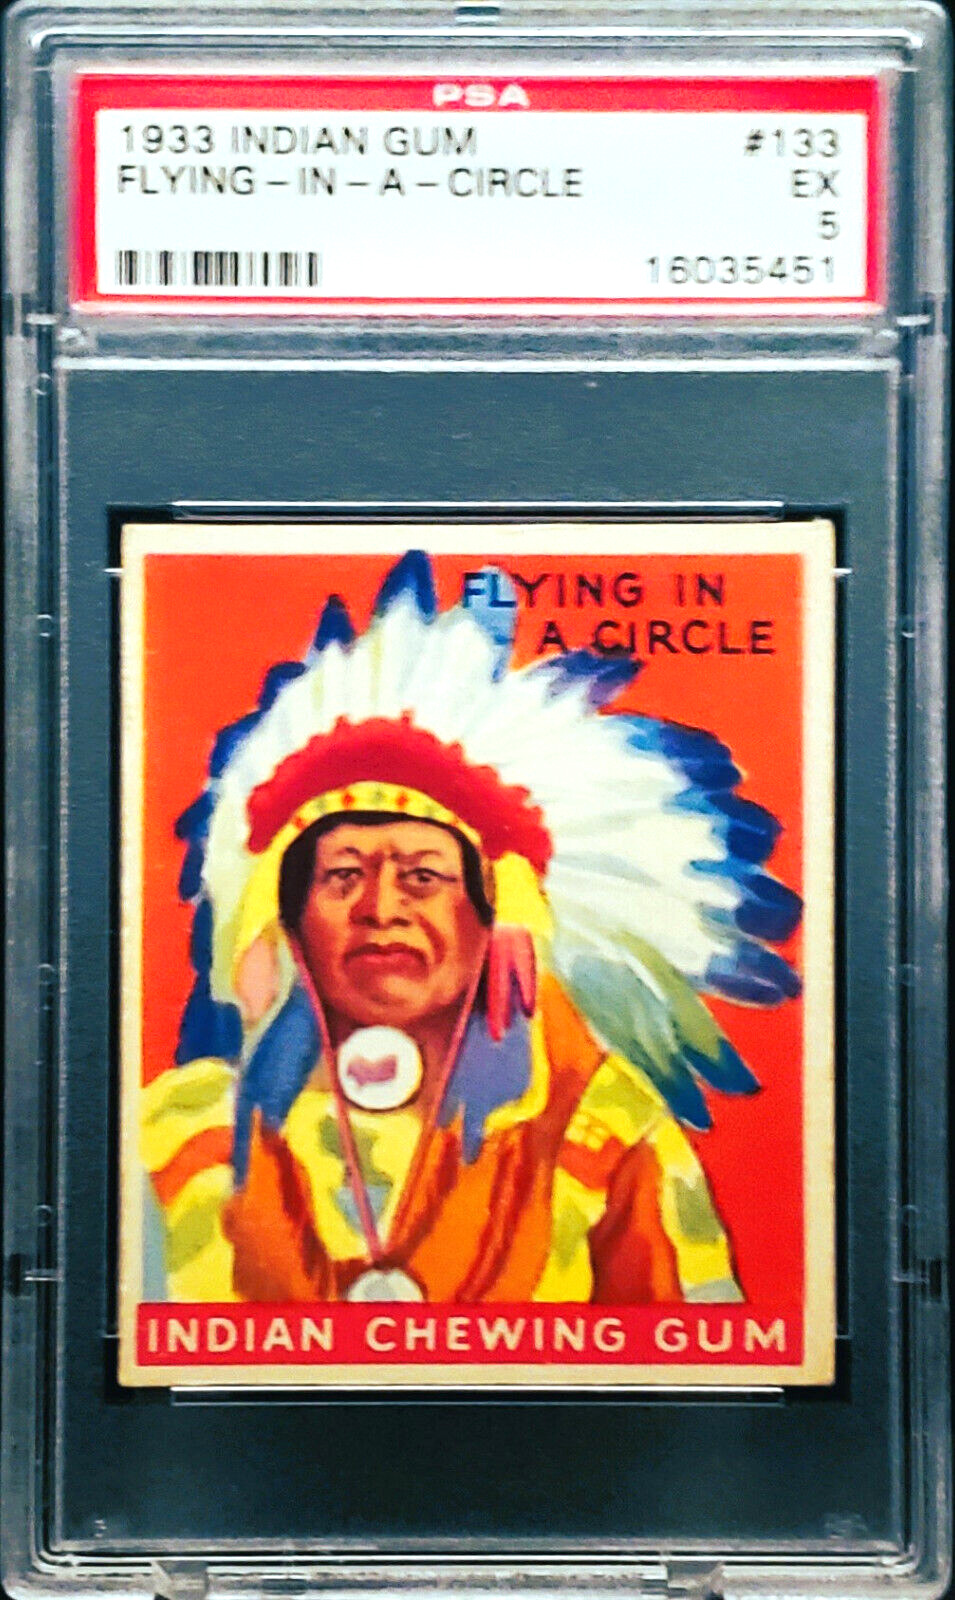 1933 R73 Goudey Indian Gum Card - #133 - FLYING-IN-A-CIRCLE - Series 192 - PSA 5